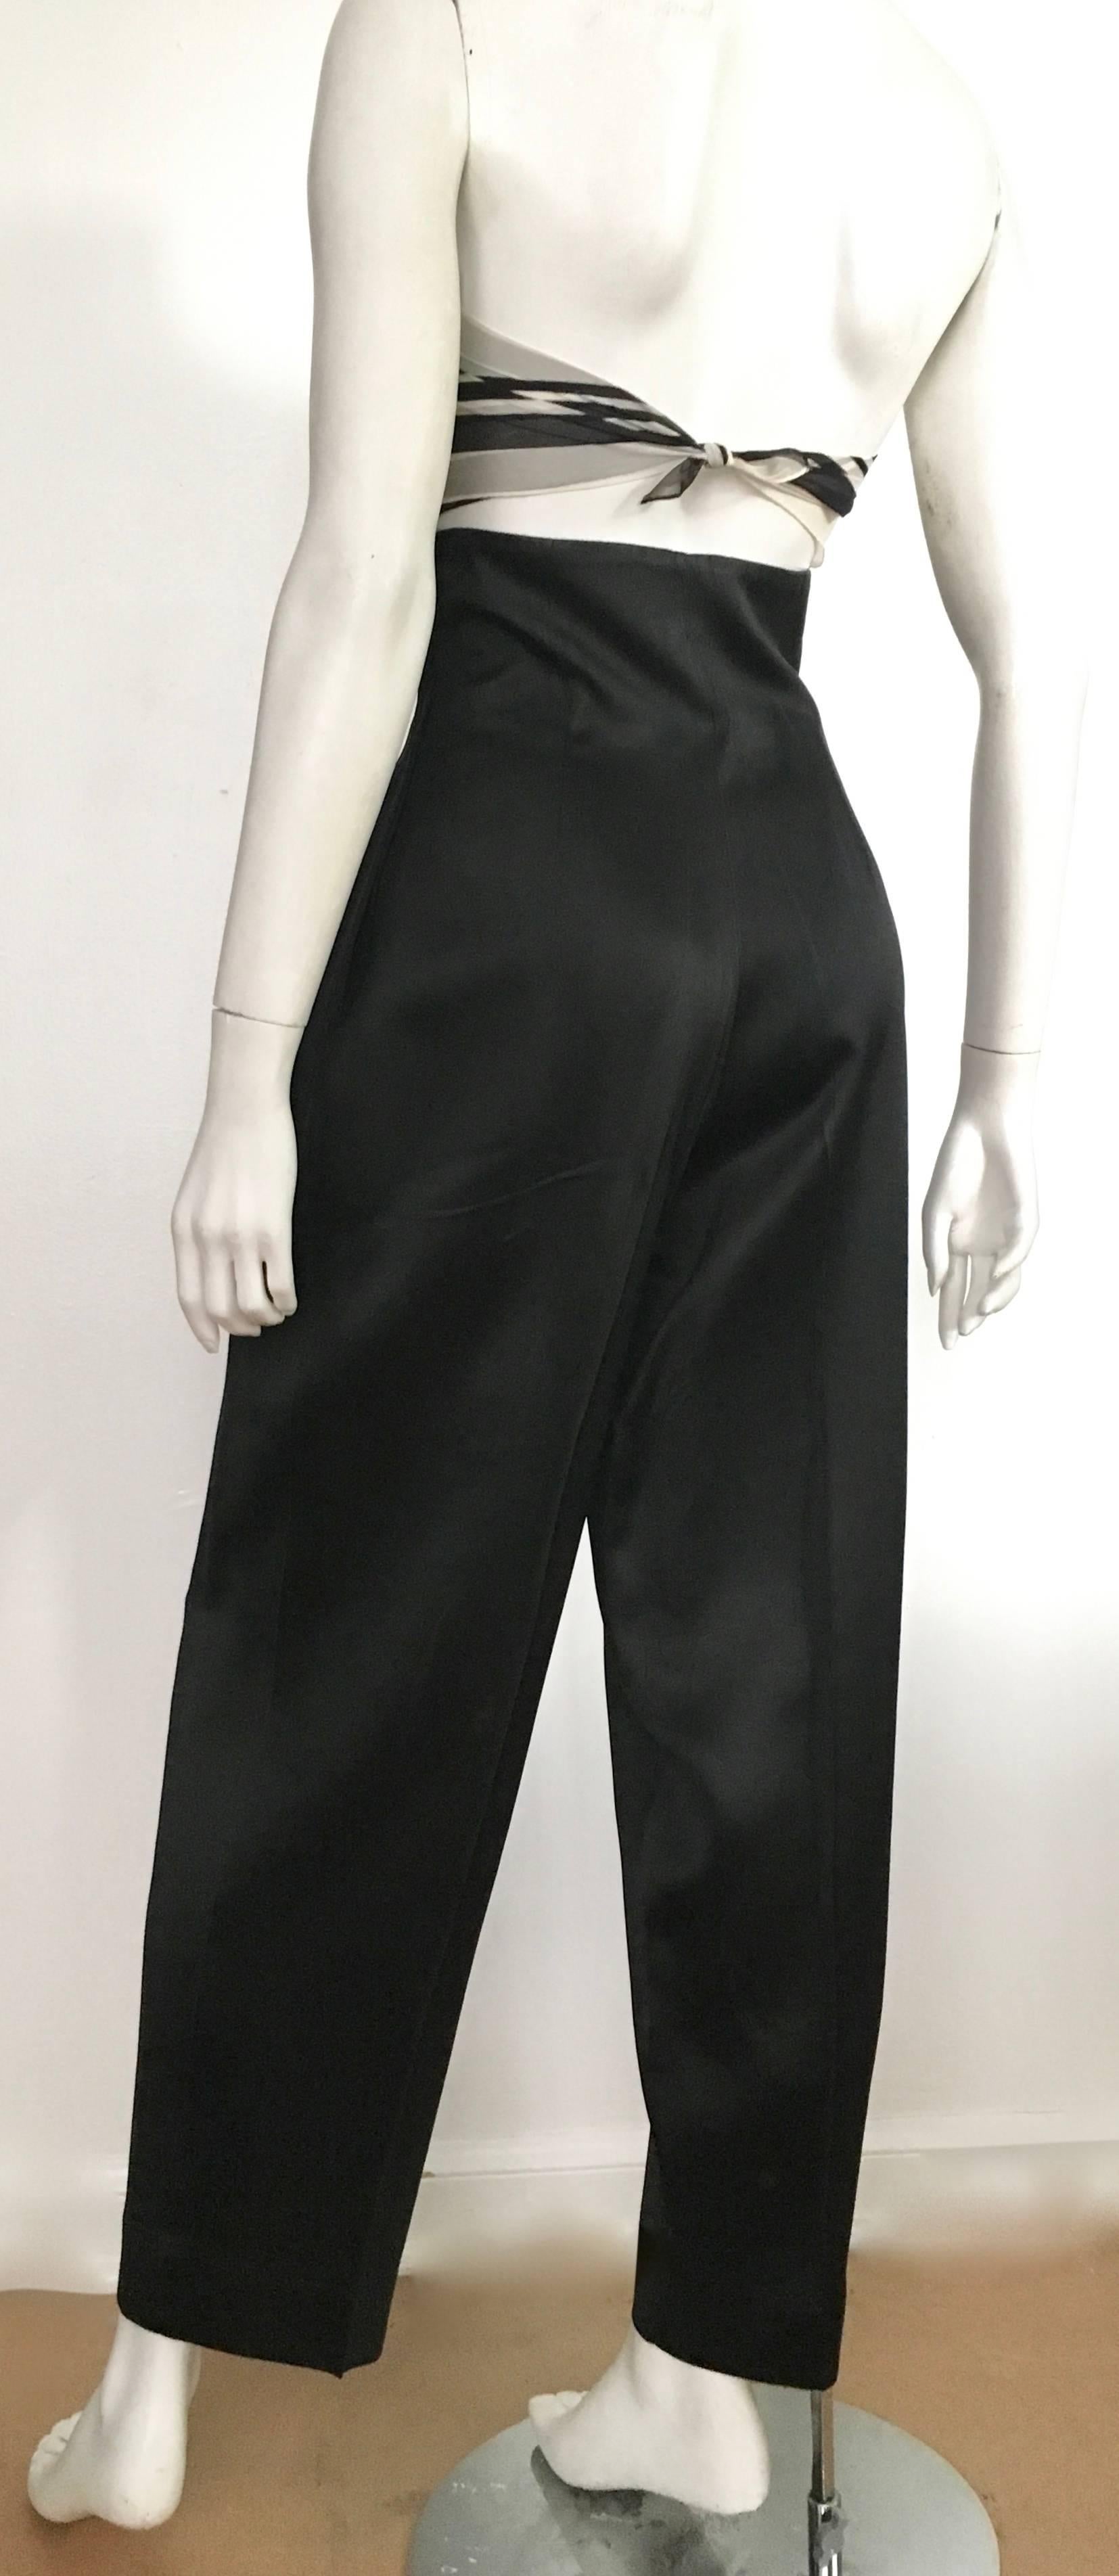 Patrick Kelly 1980s Black High Waisted Evening Pants with Pockets Size 4/6. 7